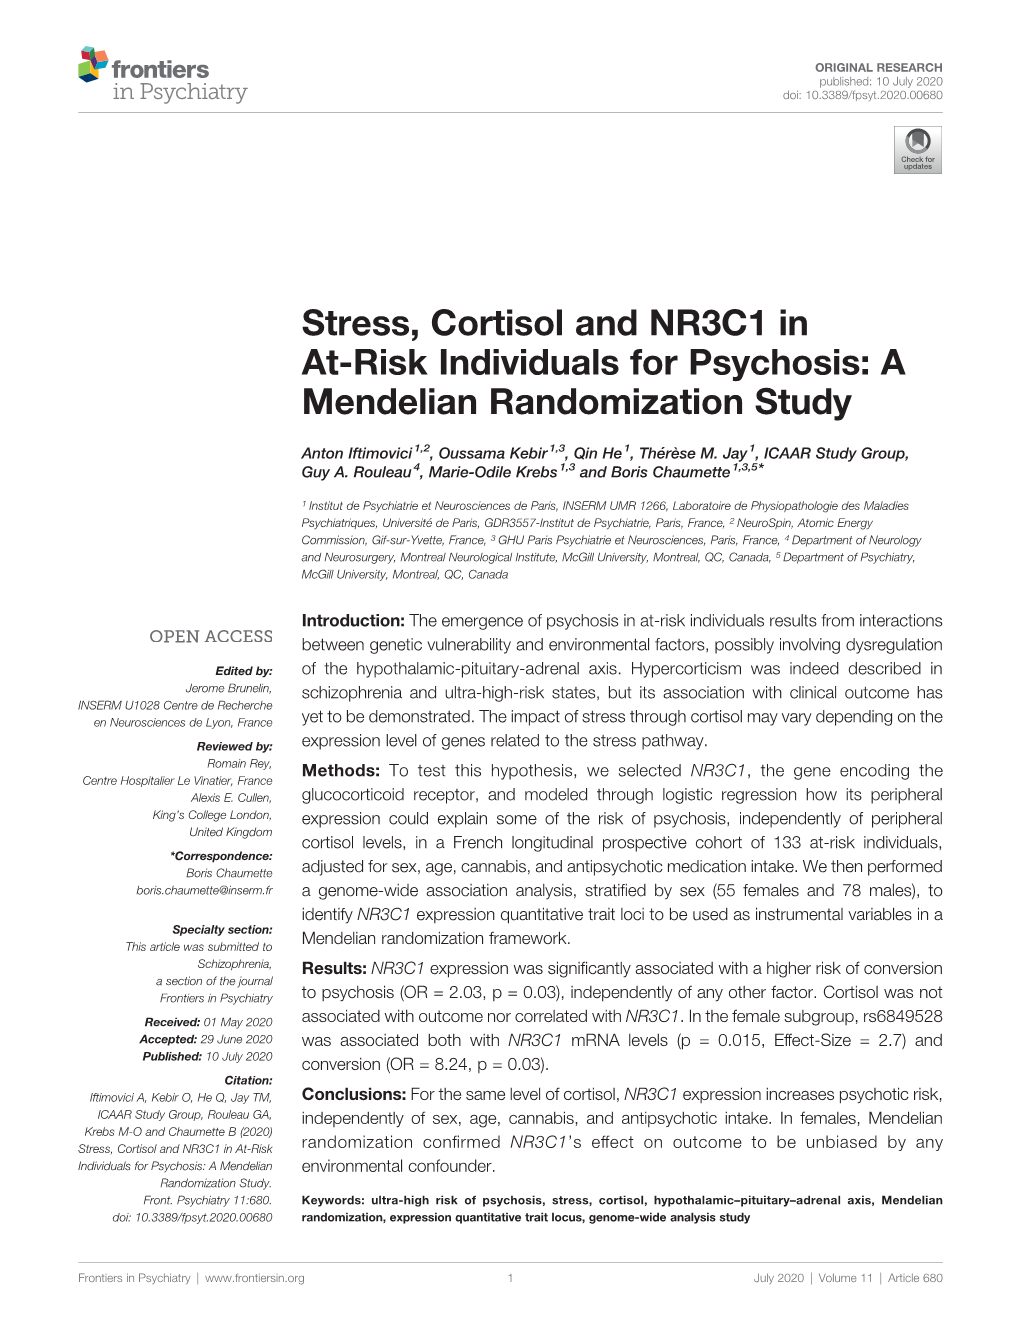 Stress, Cortisol and NR3C1 in At-Risk Individuals for Psychosis: a Mendelian Randomization Study